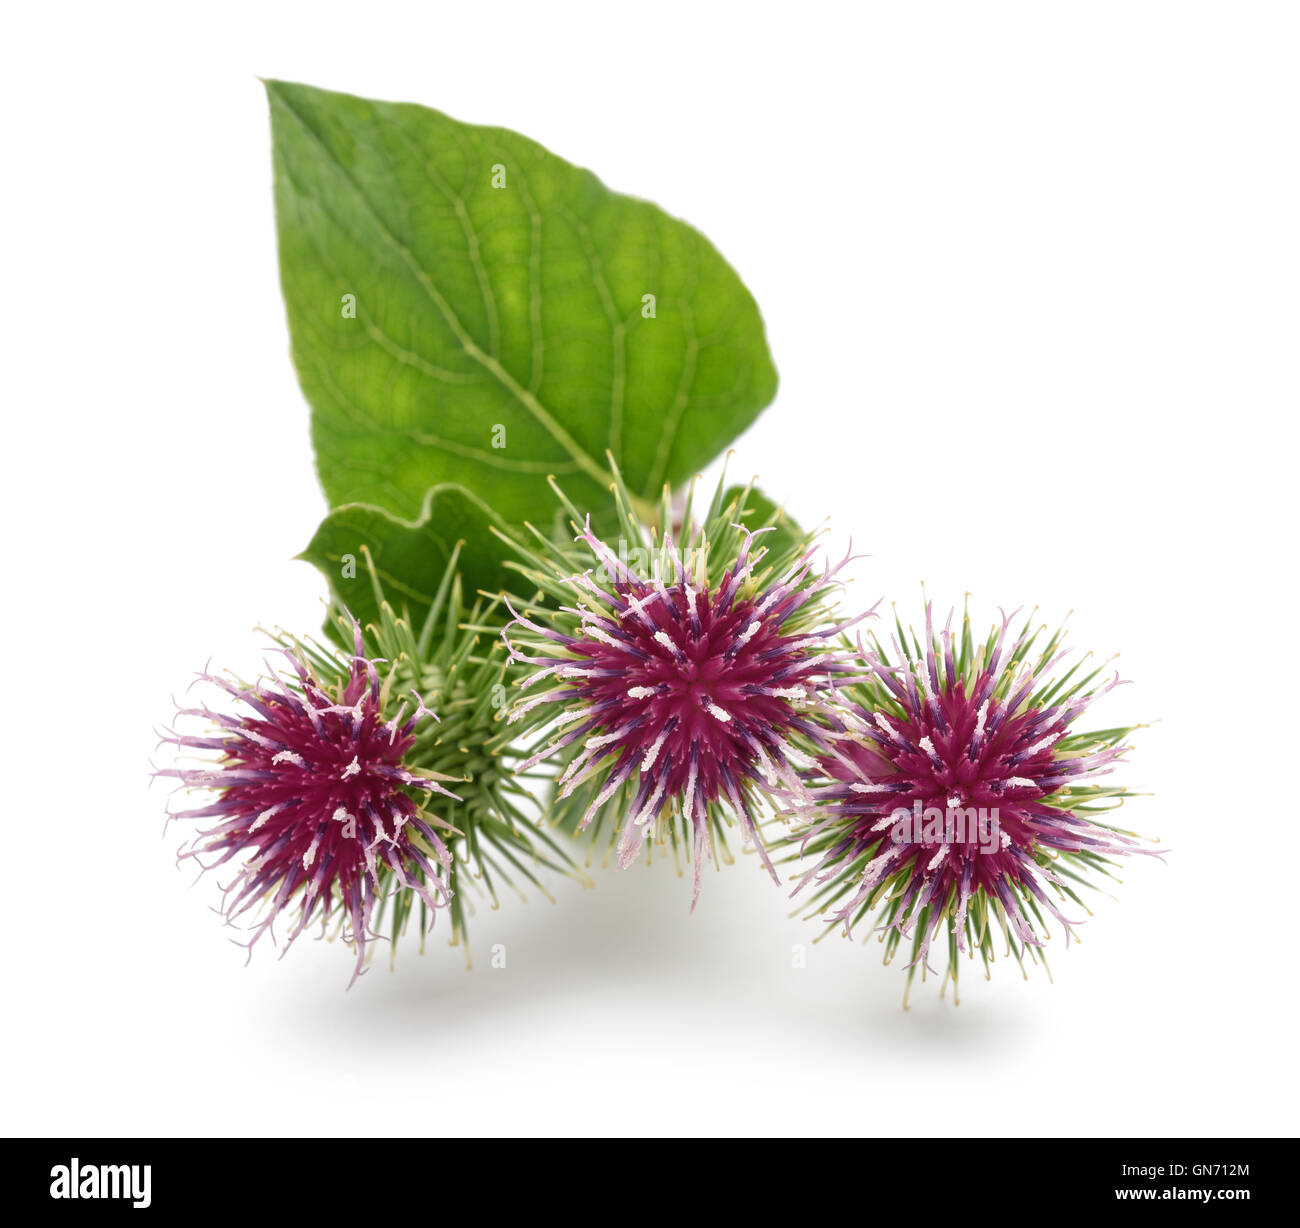 Burdock flowers isolated on a white background Stock Photo